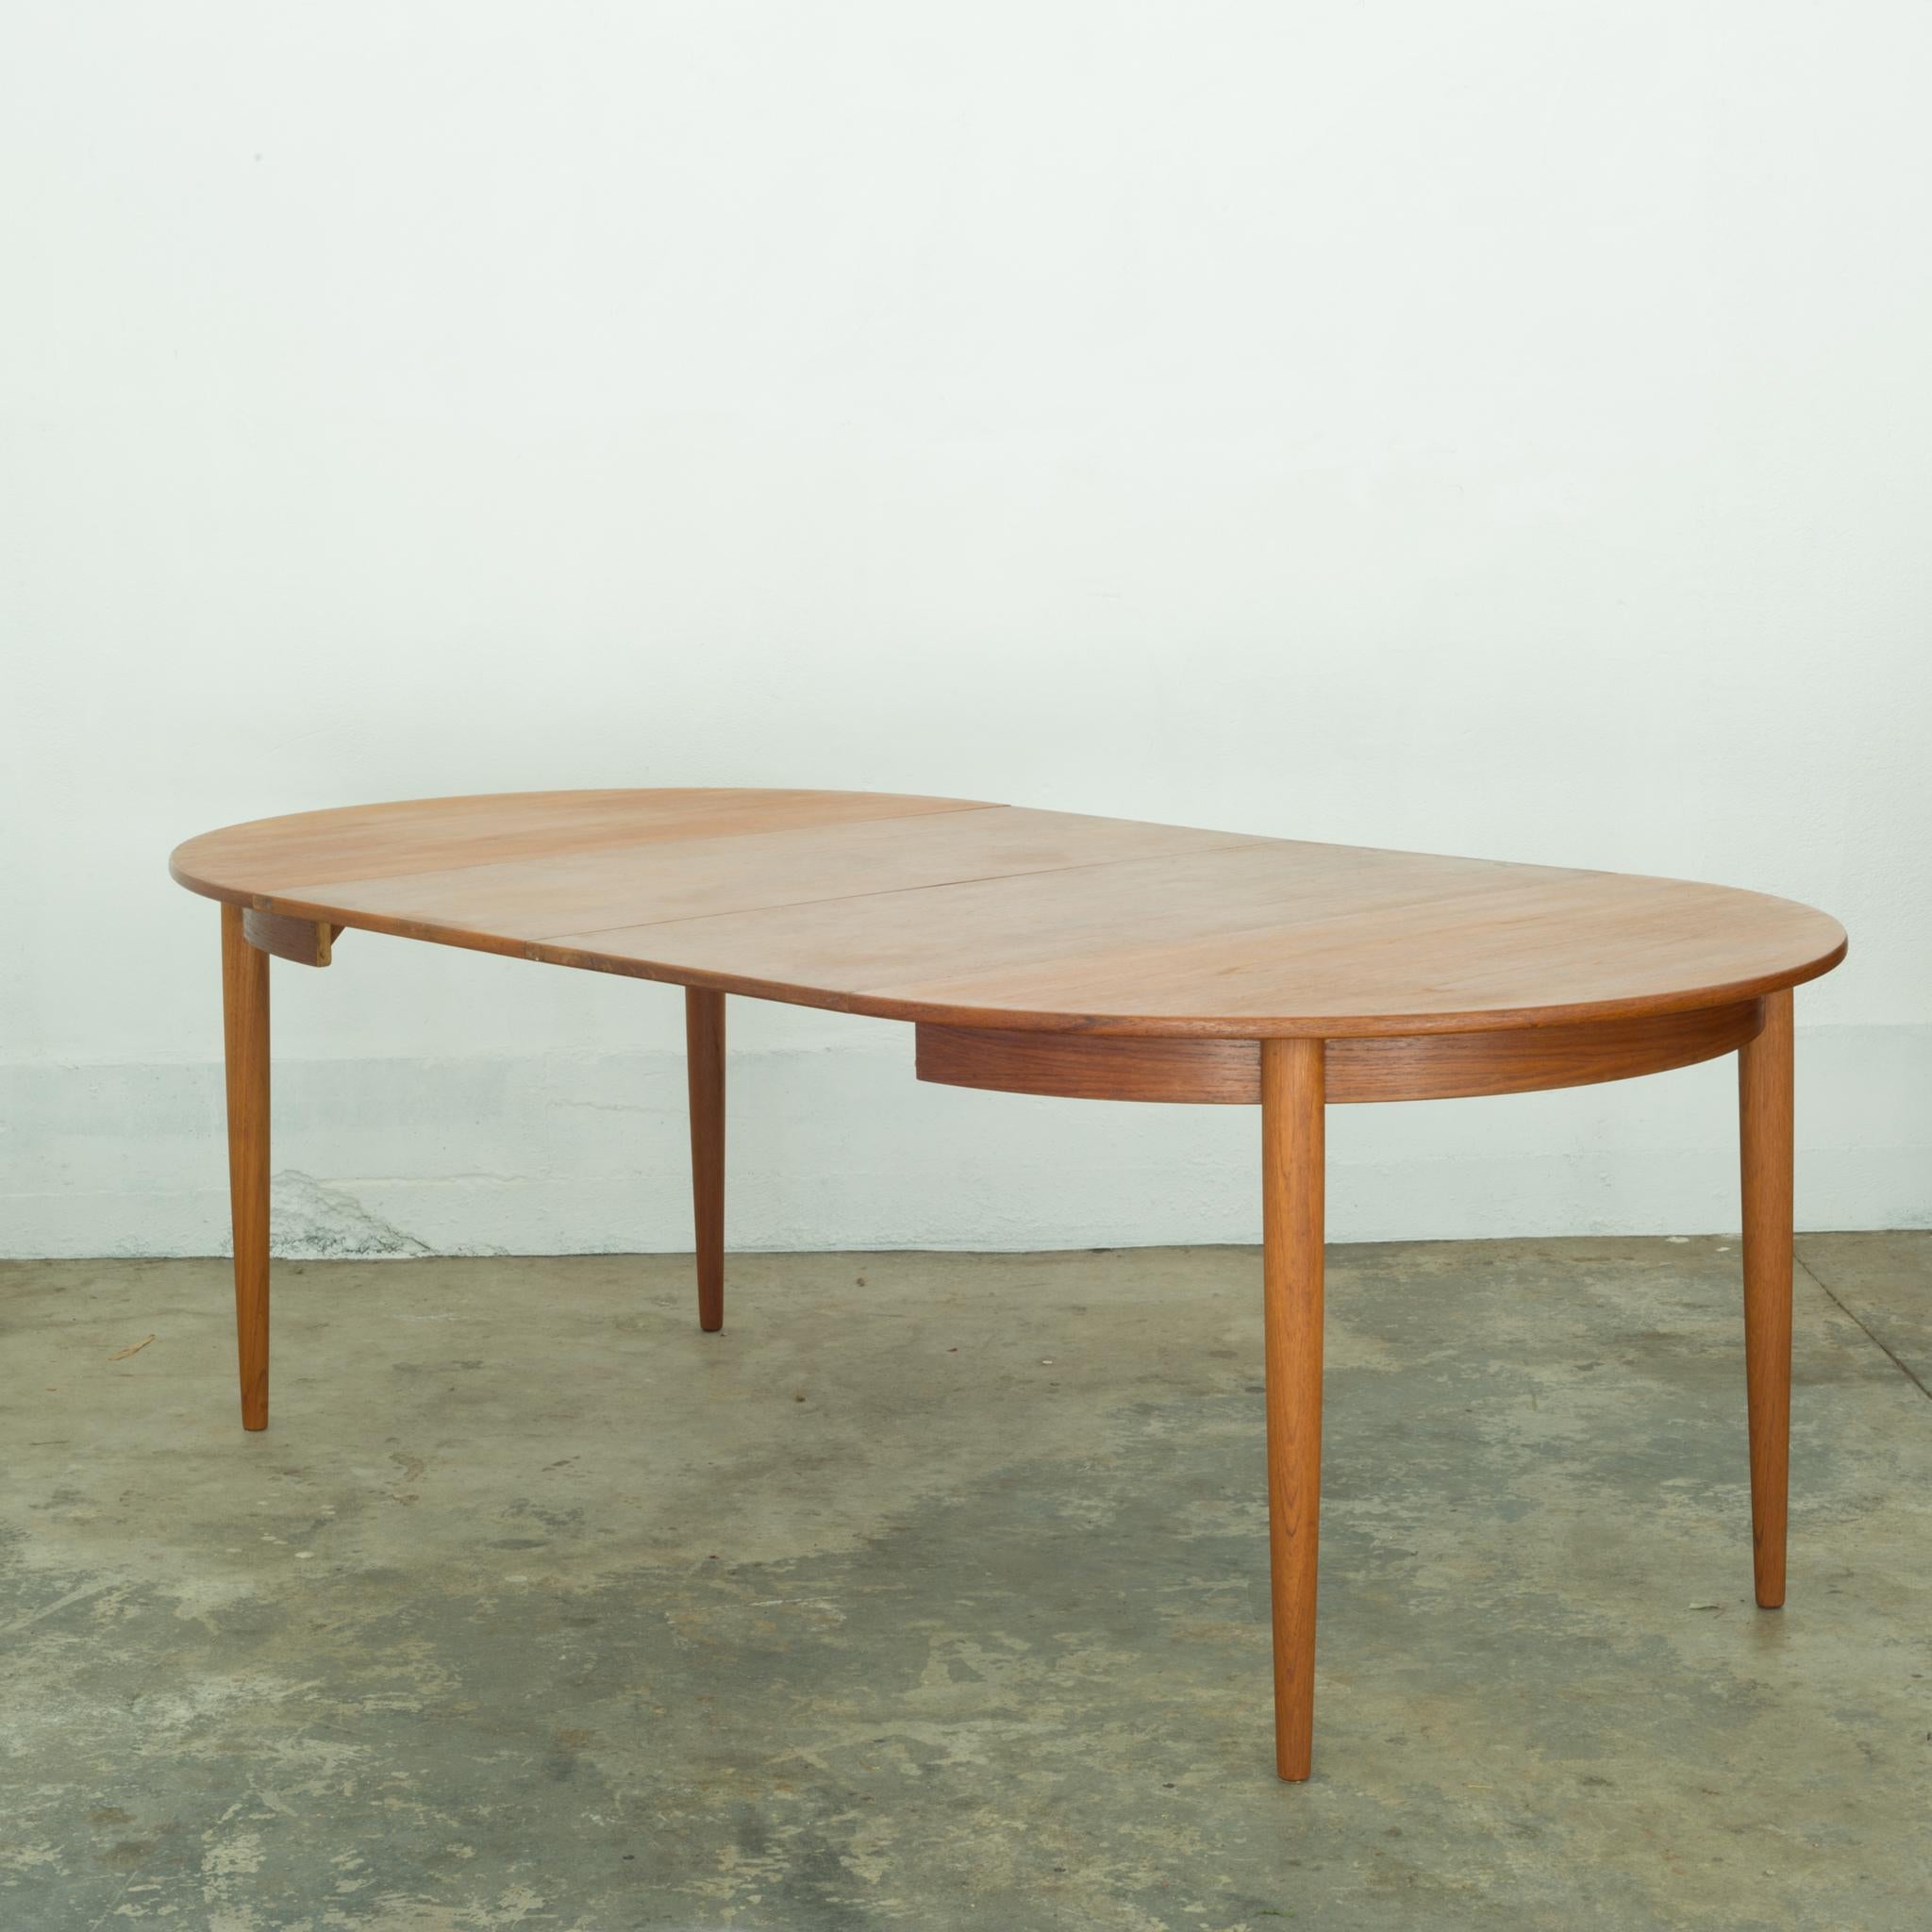 About

This is an original round to oval extension Teak dining table with two leaves that drop into place. The leaves are minus the trim of the table which creates a striking silhouette unique from the round table.

Creator Gudma Mobelfabrik,